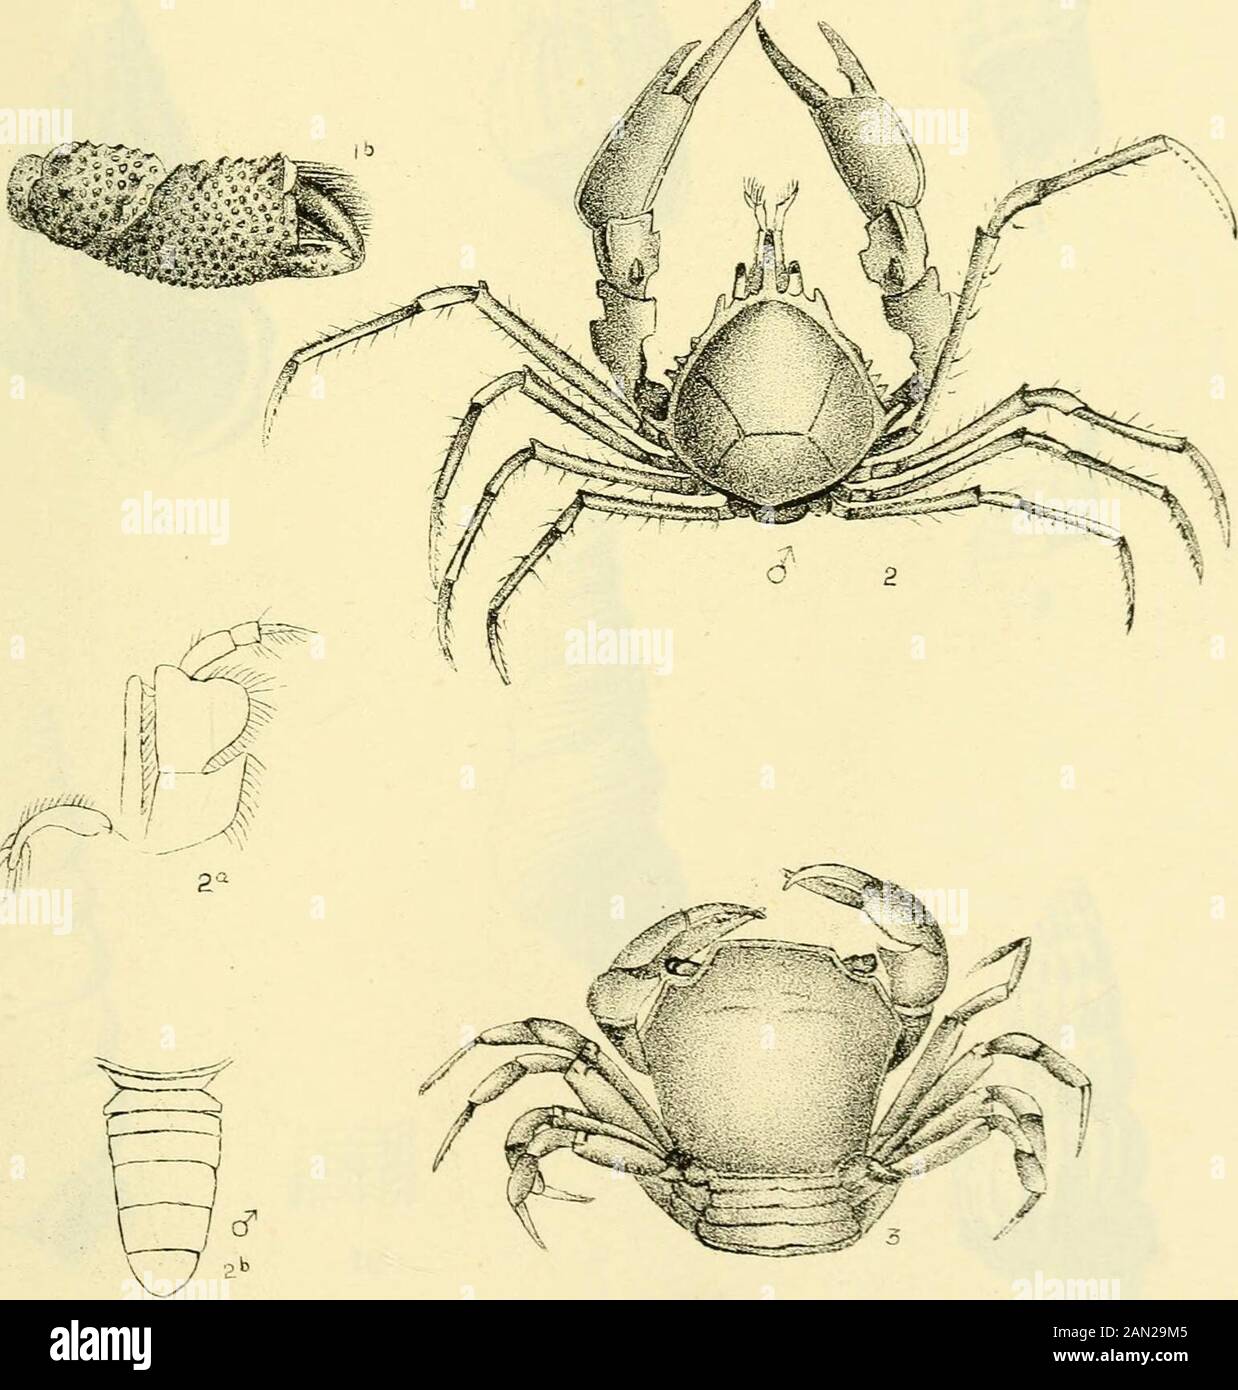 Transactions and proceedings and report of the Royal Society of South Australia (Incorporated) . V H,B DEL .S^E- & ^ -- NC-H«&gt;, IrTRICHIA AUSTRALIS. 27HYMENOSOMA ROSTRATUM. 3rLIT0CHEiRA GLABRA. Vol. X.XX., Plate IV. Stock Photo